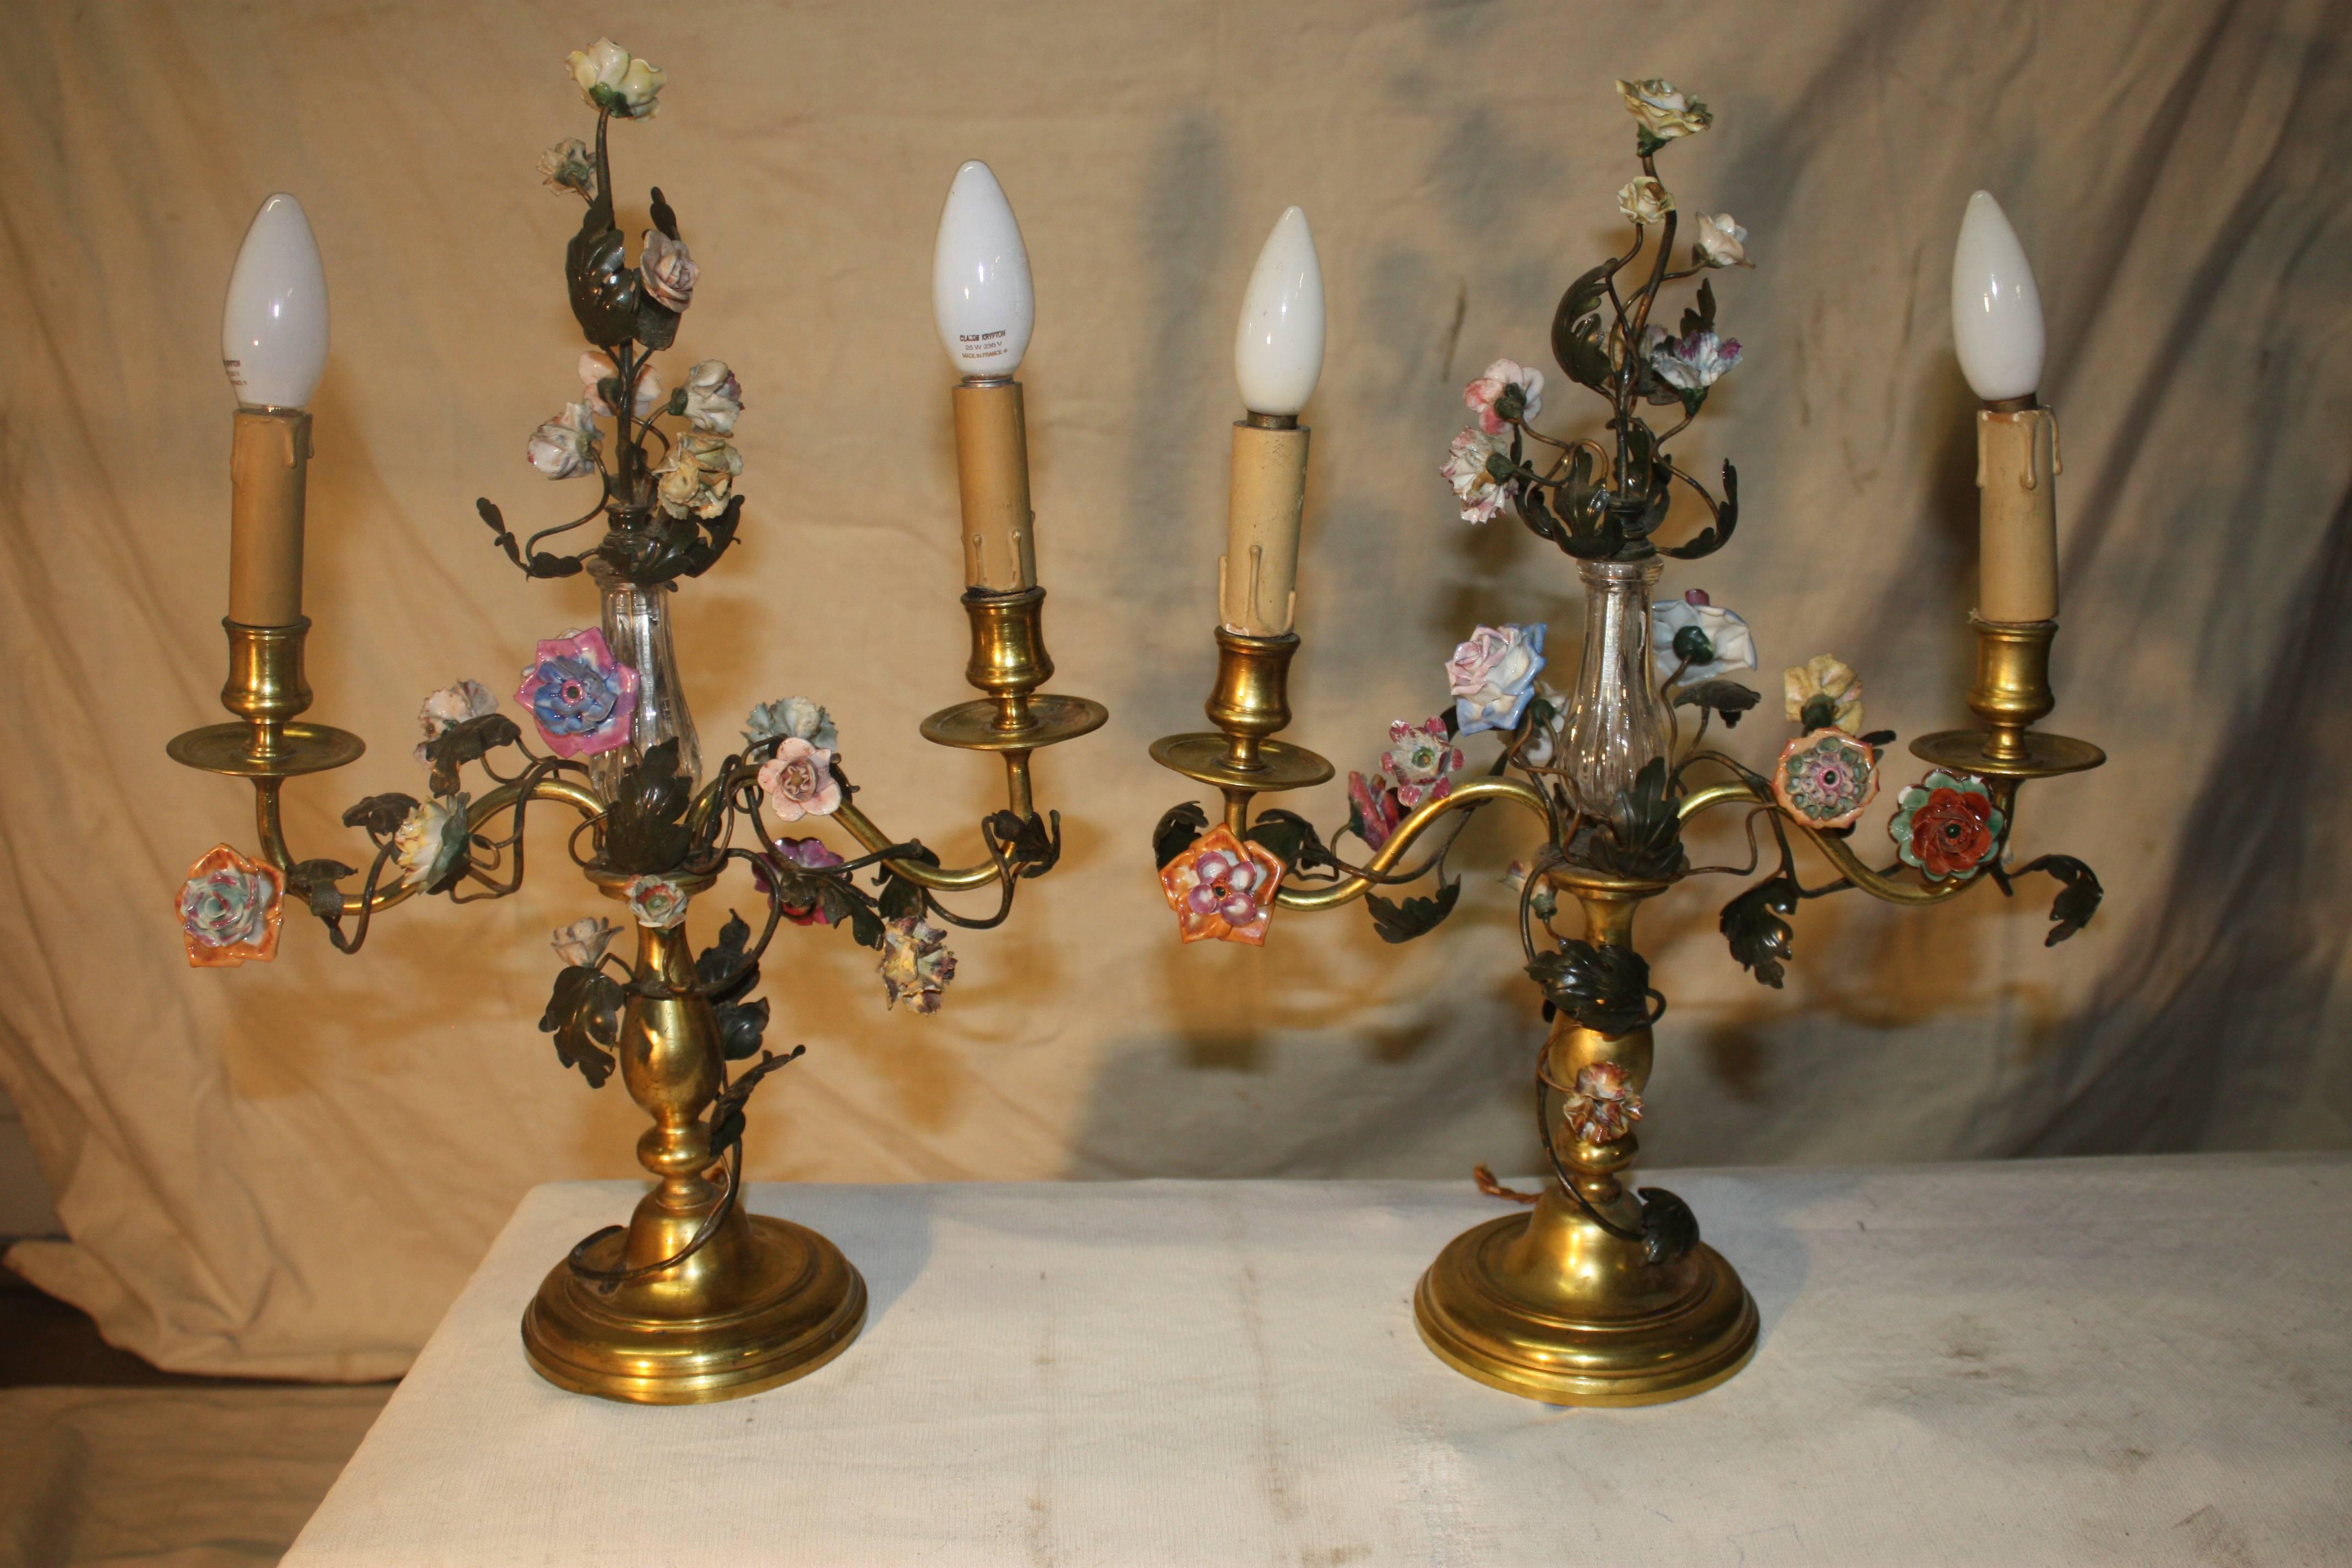 Pair of 19th century French bronze candelabras with porcelain flowers, Louis XVI style.